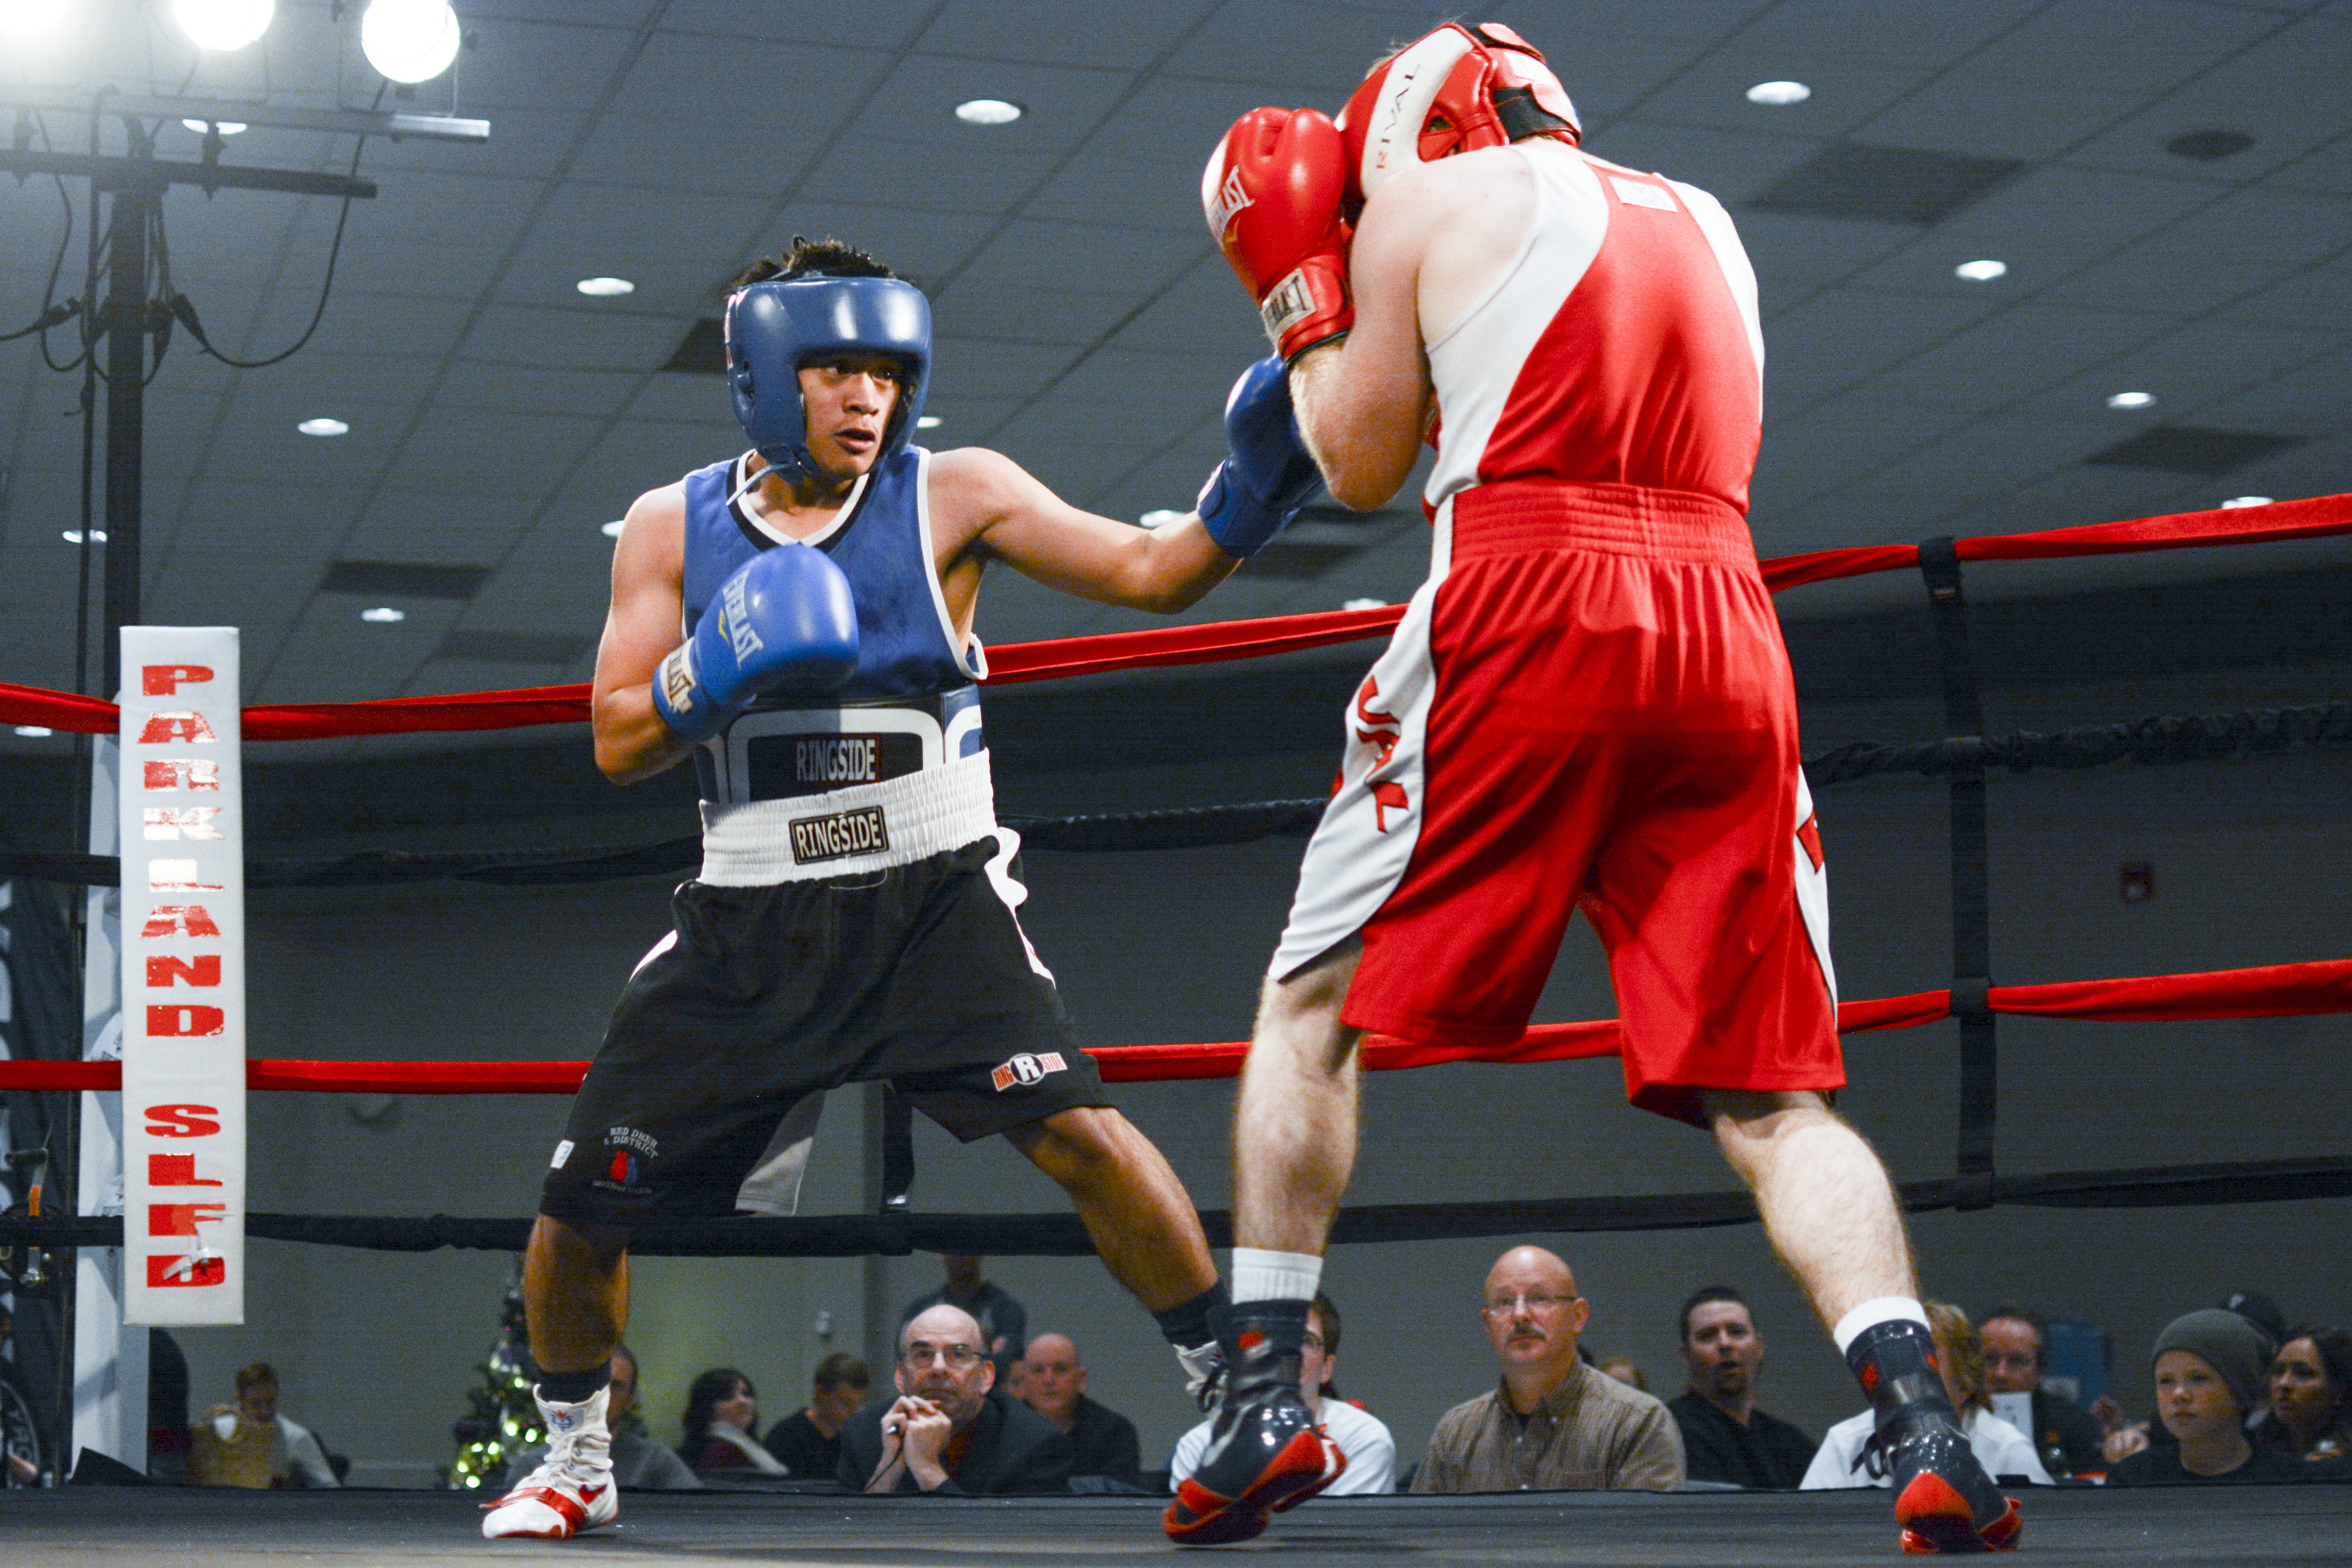 BIG WIN – Louie Cudillo of the Red Deer Boxing Club took home a big win and was named Fighter of the Night after facing off against Blake McPhee out of Sweet Science in Fort McMurray during last weekend’s Rumble In Red Deer 6.